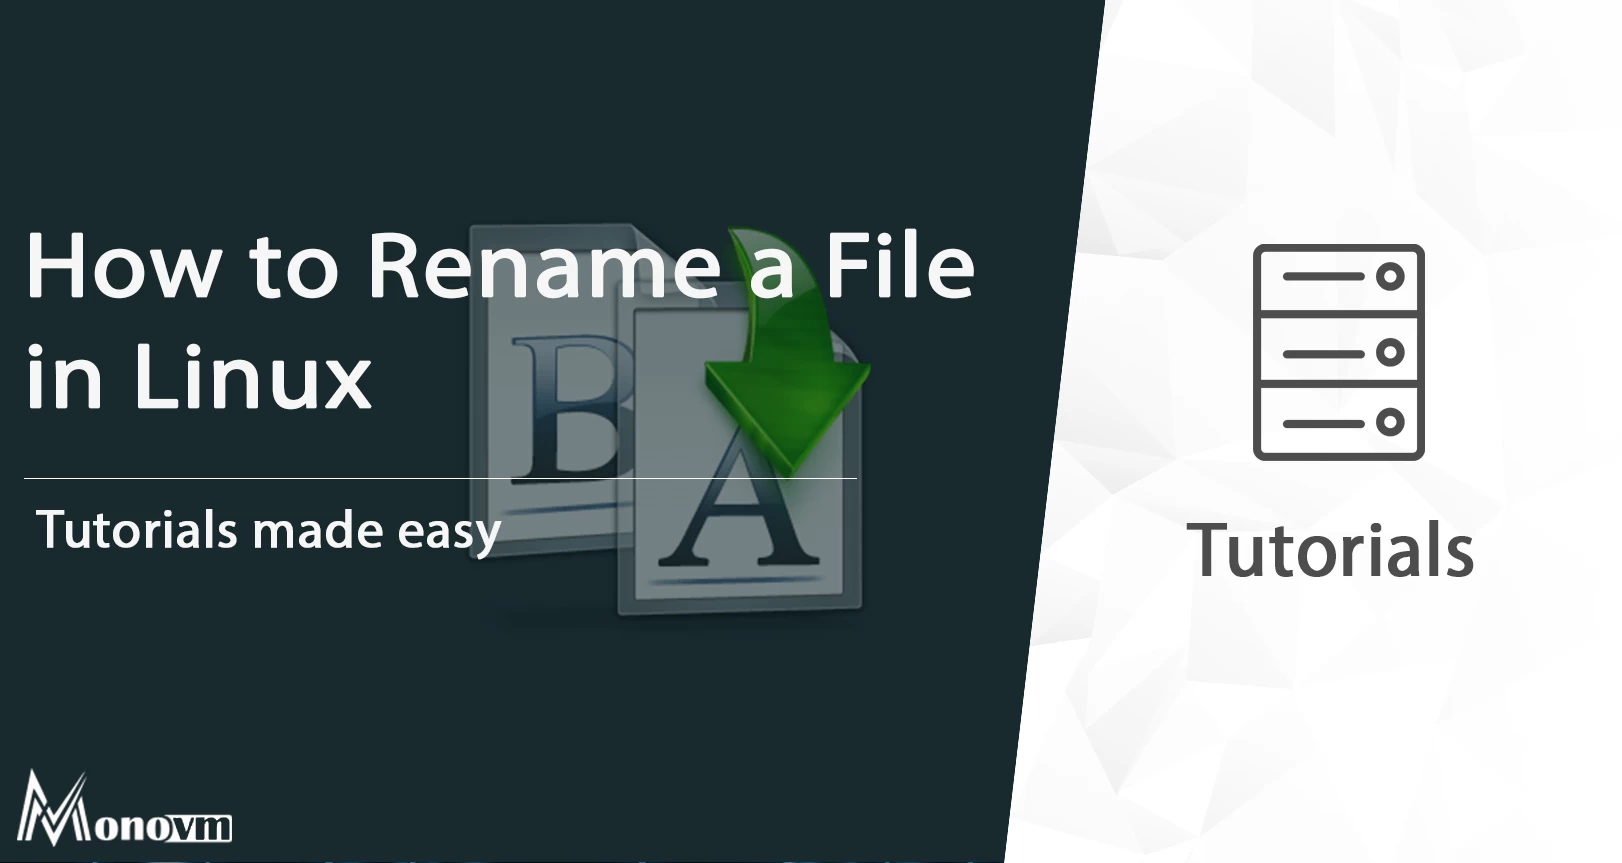 Efficient File Management: How to Rename a File in Linux with Precision and Ease